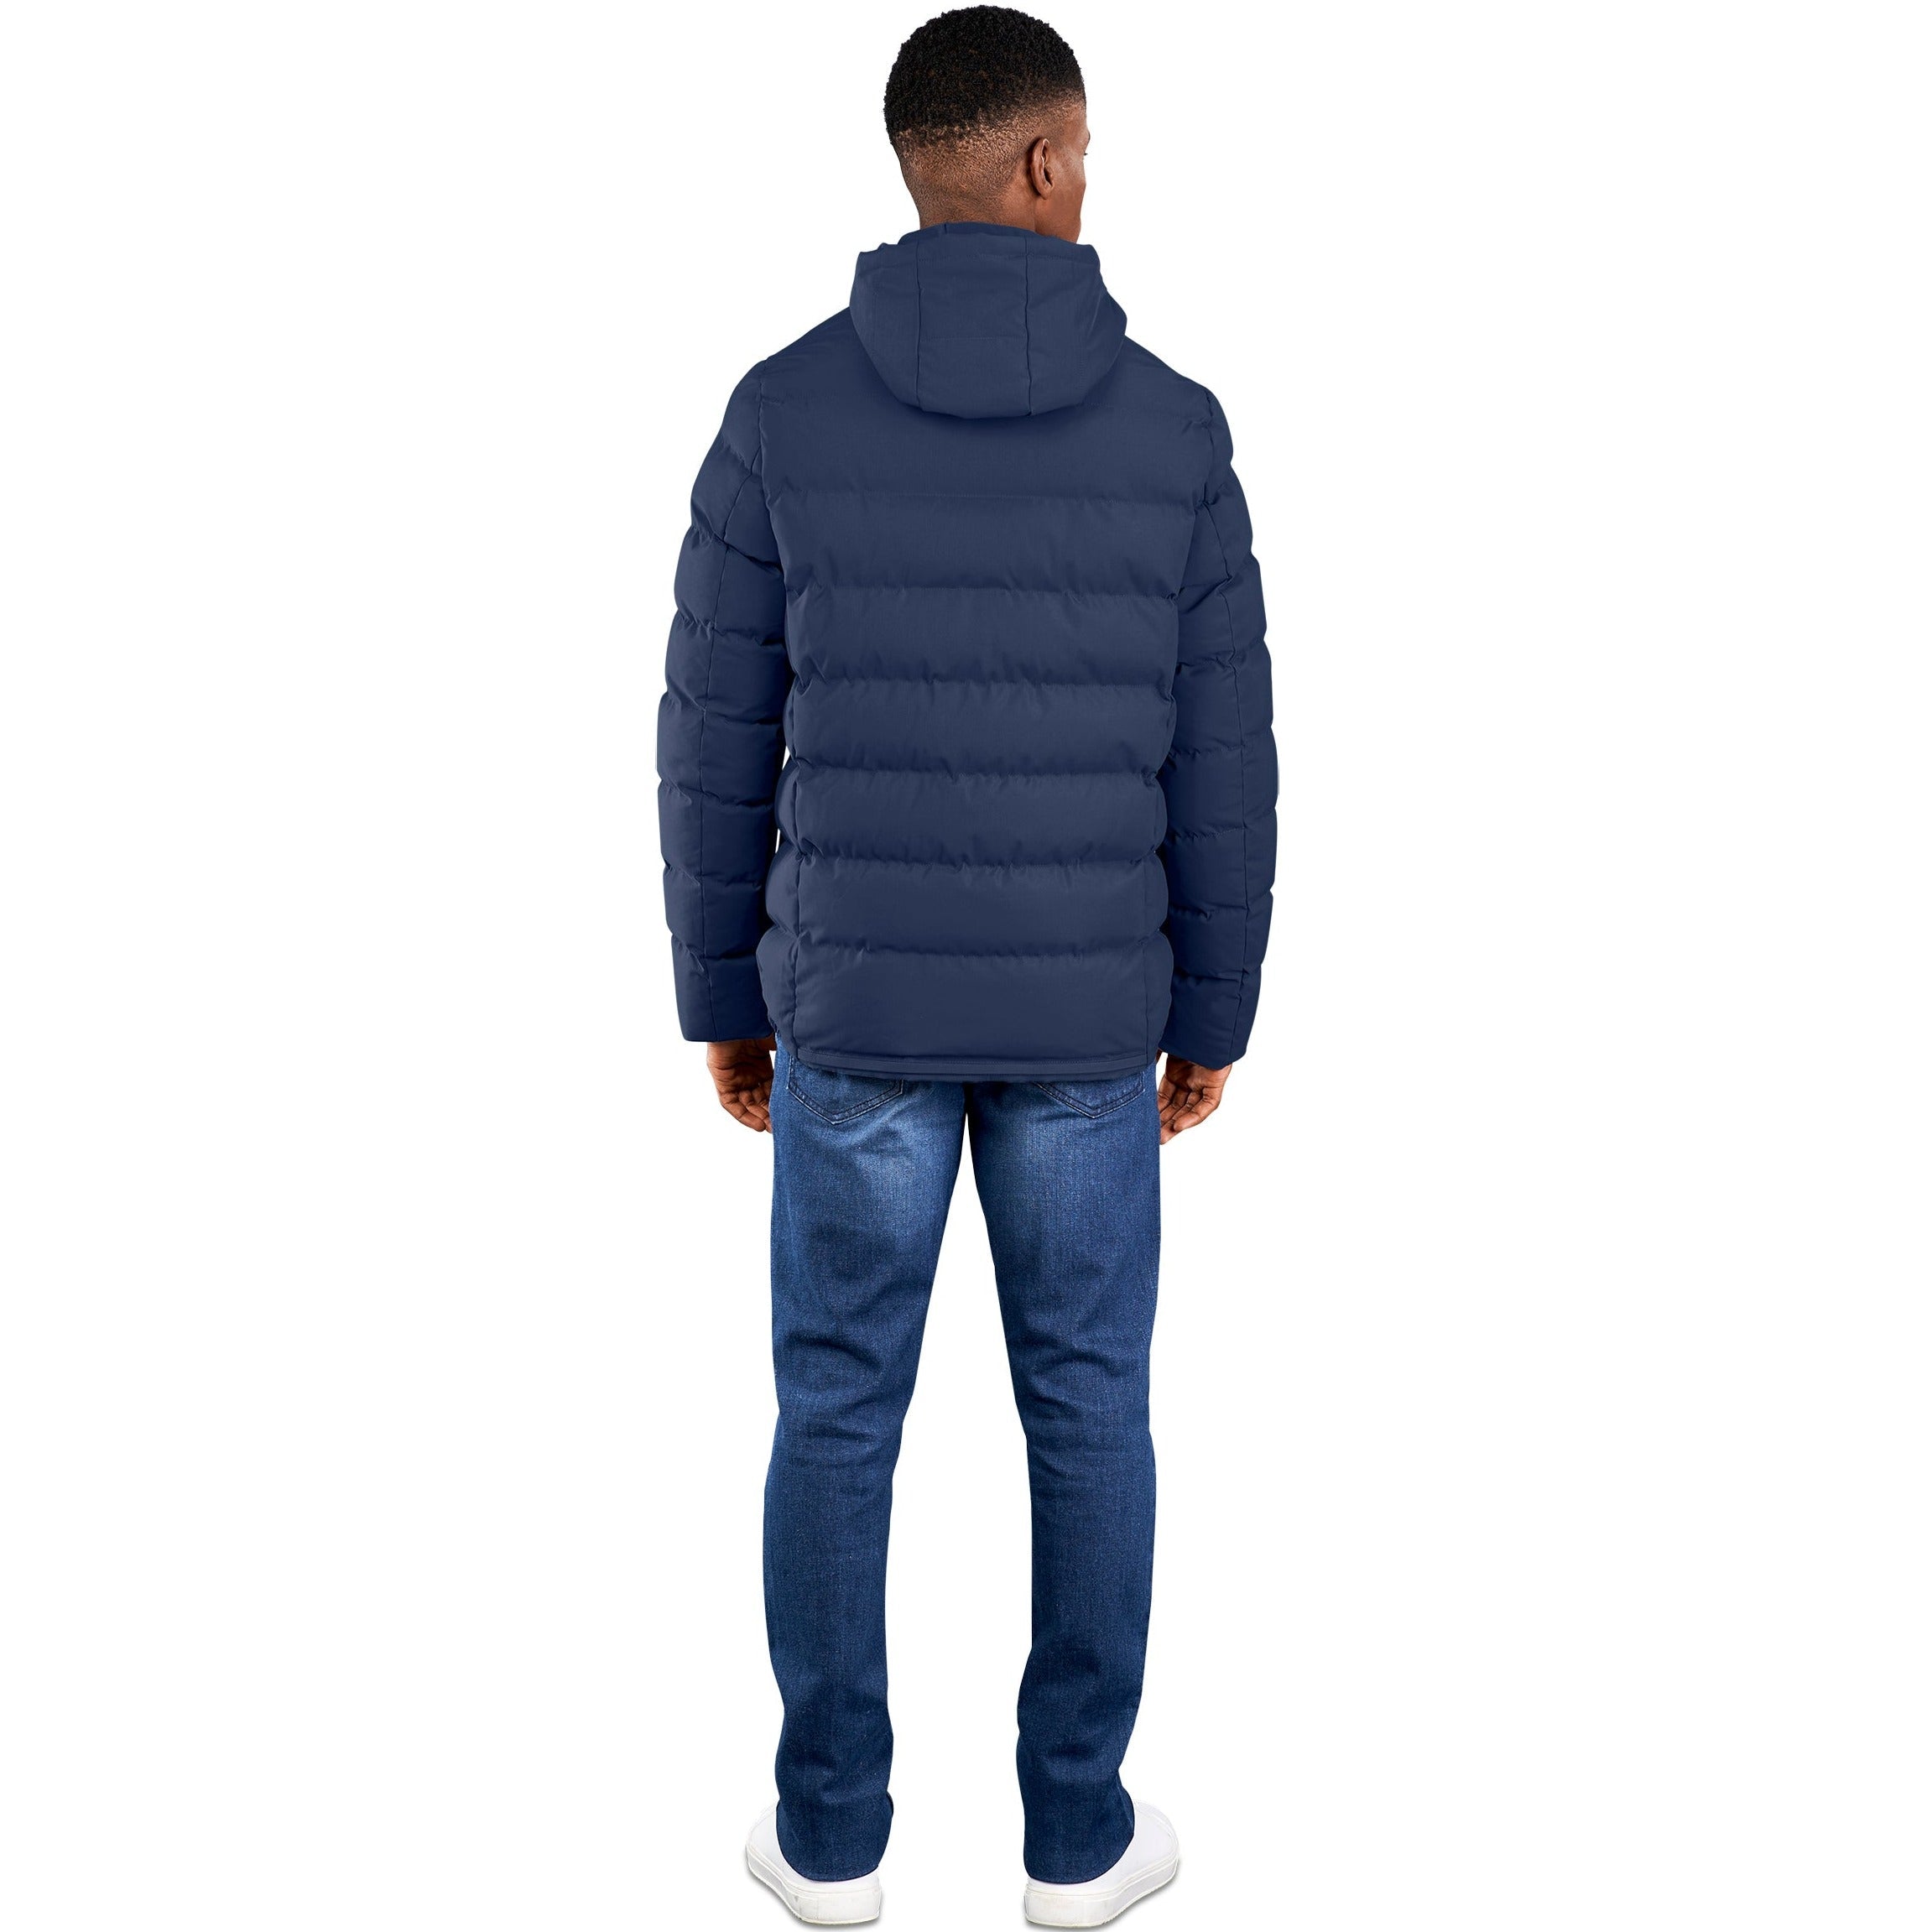 Man showing the back view of a blue padded mountain jacket